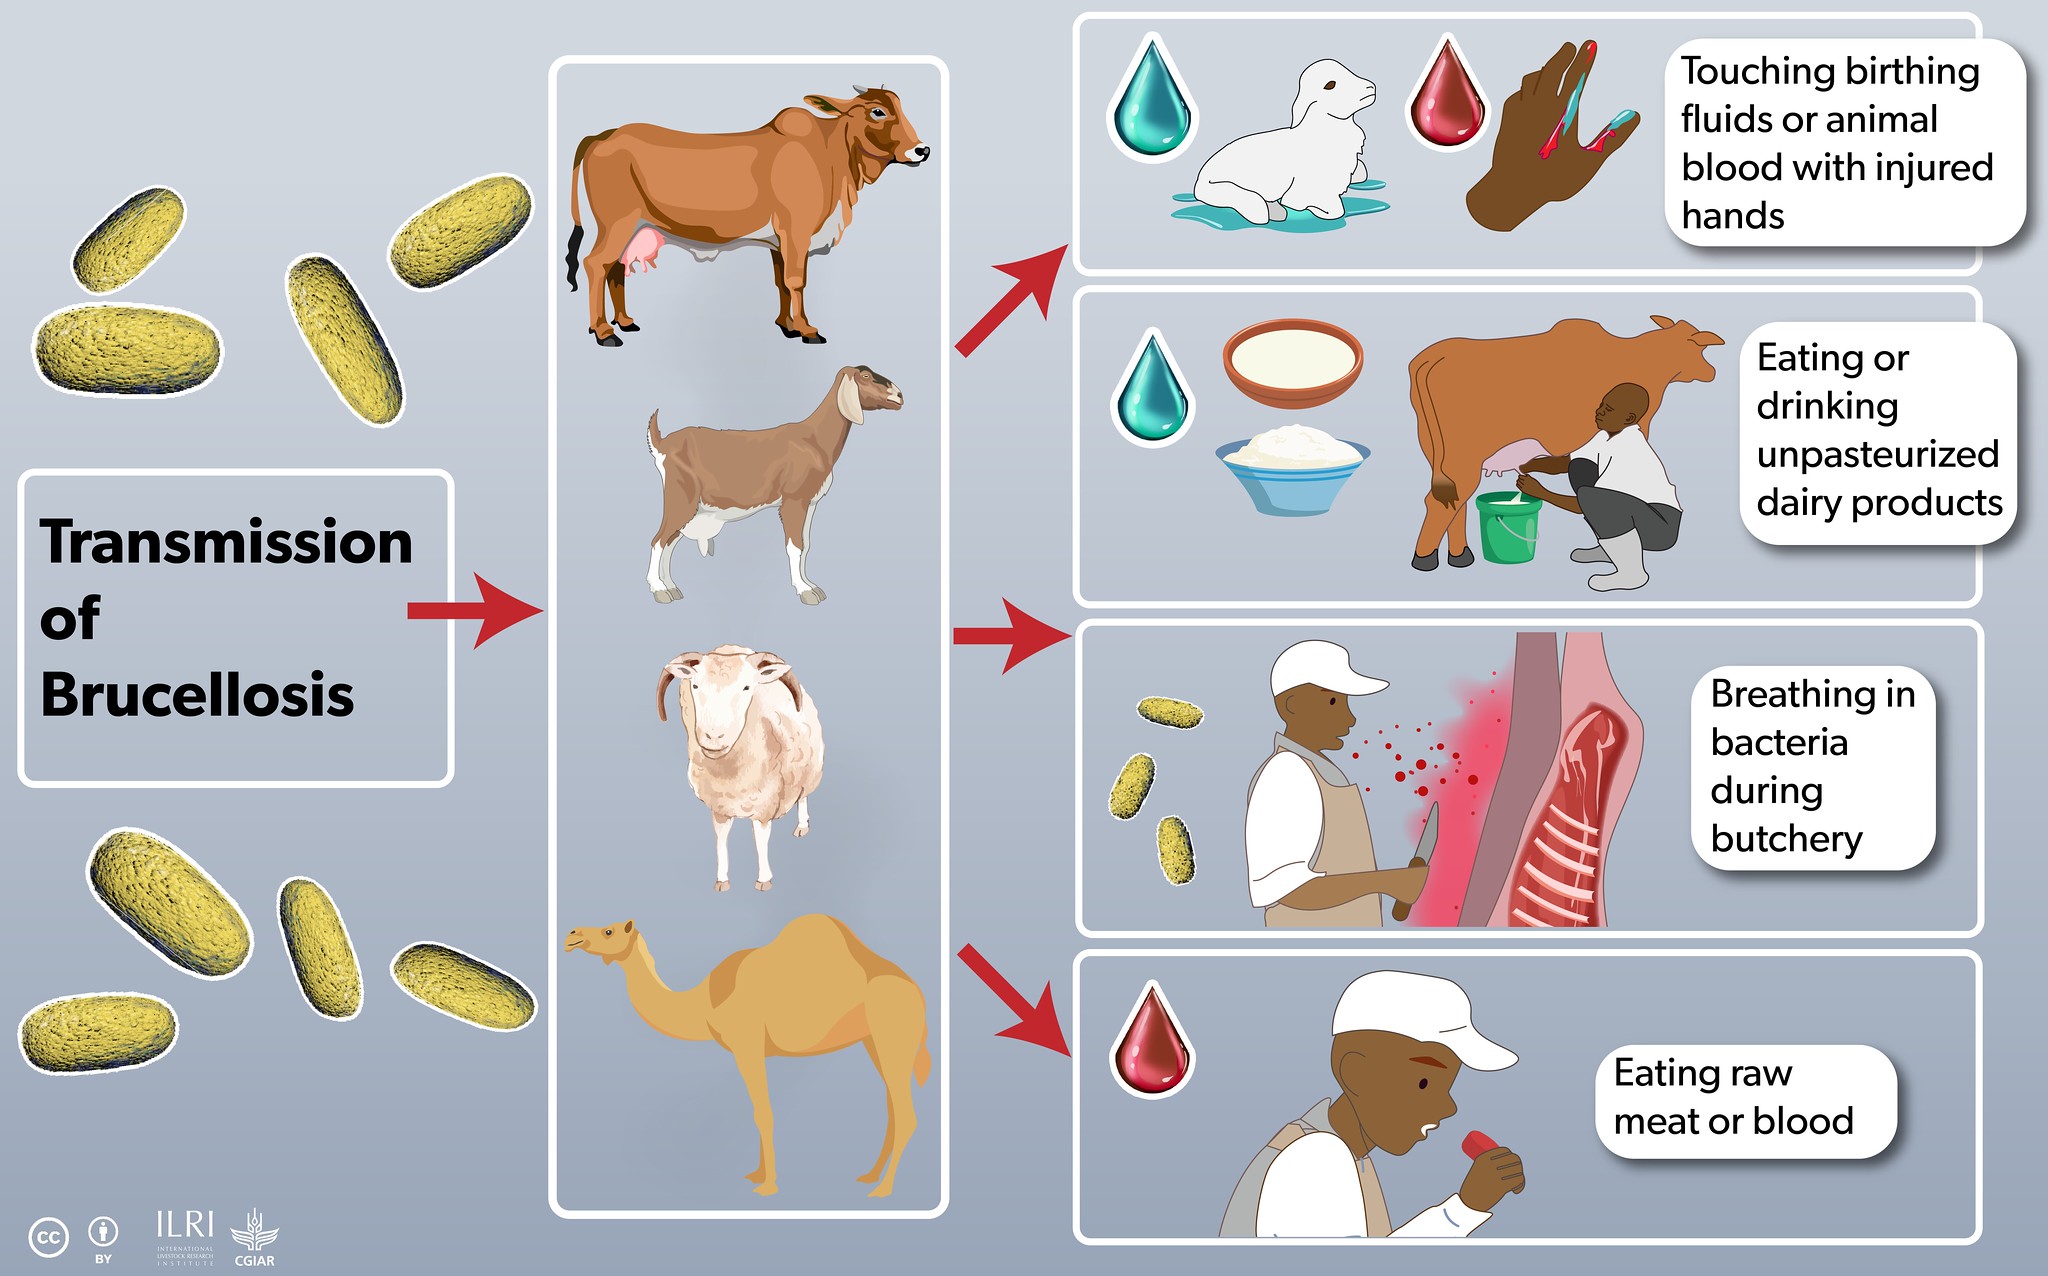 How brucellosis is transmitted